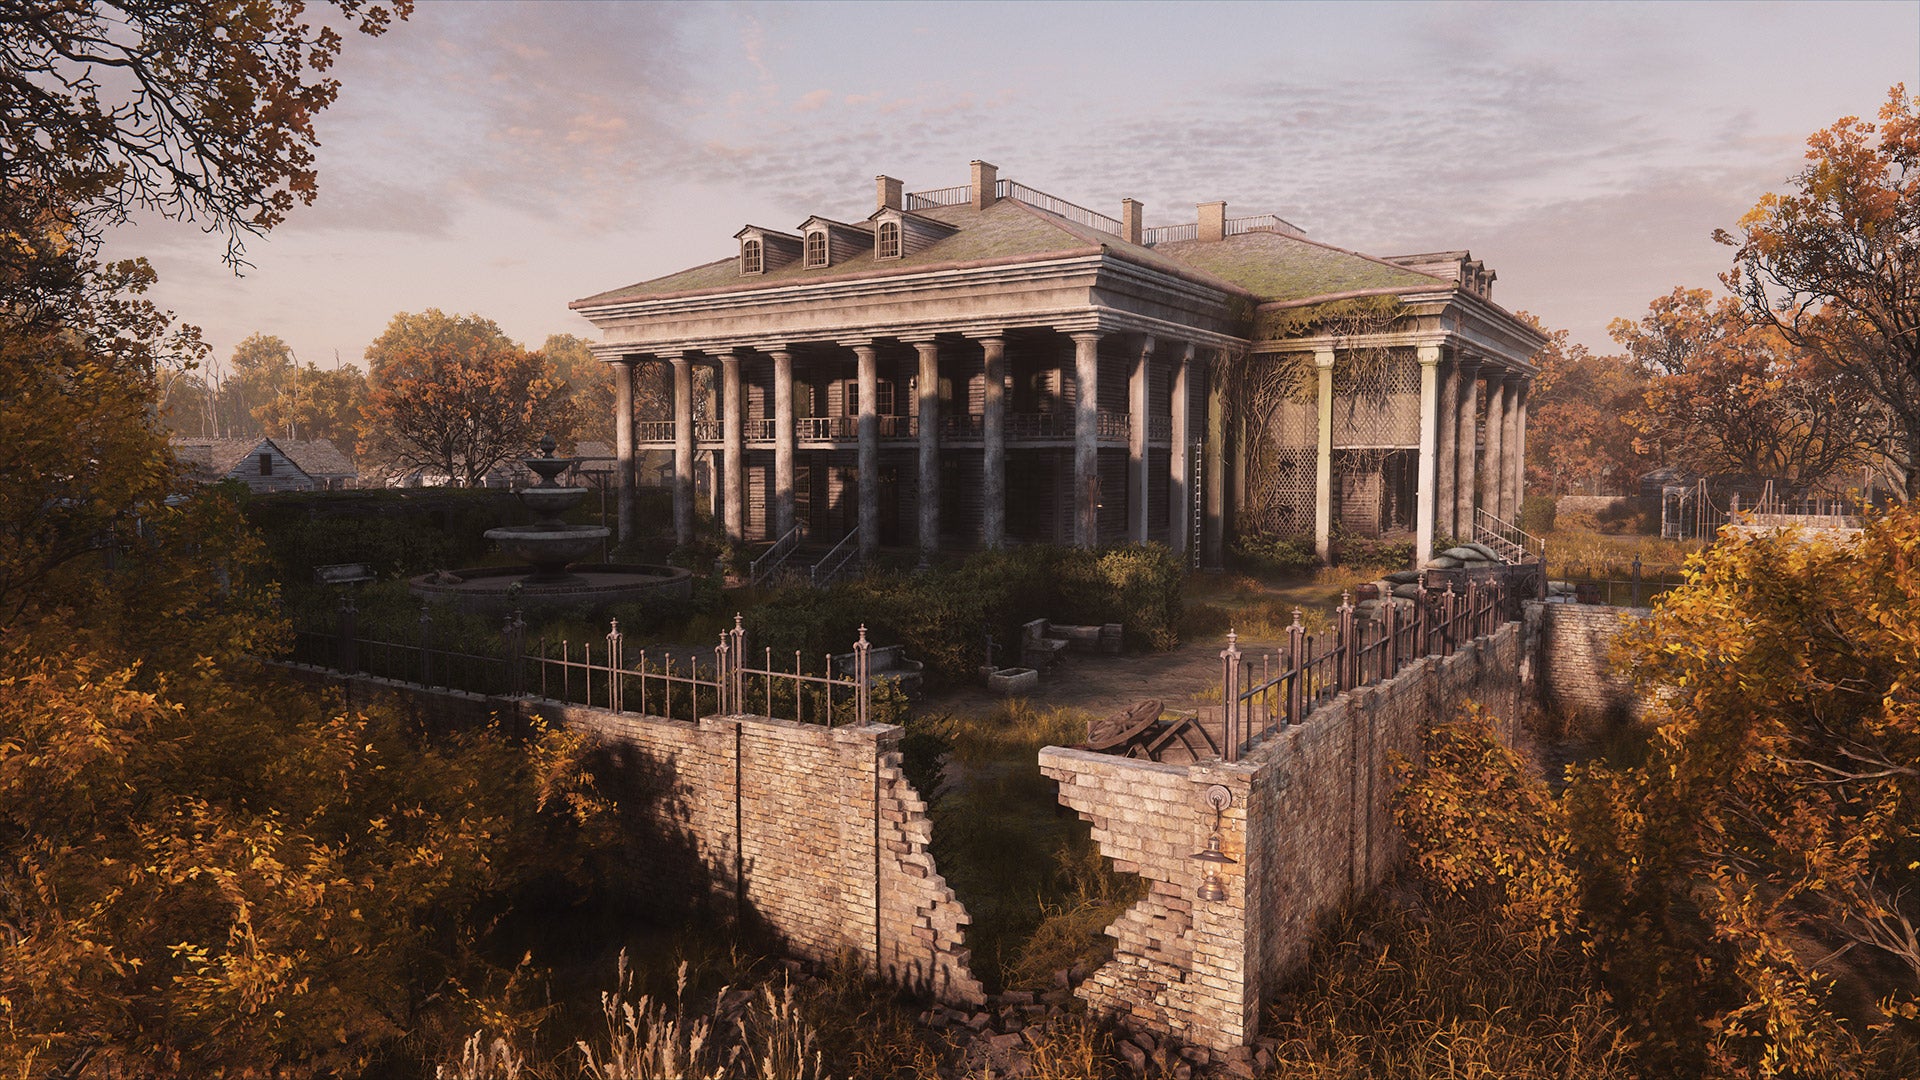 A screenshot of Hunt: Showdown's new map, De Salle, showing a large building with columns and an overgrown surrounding.